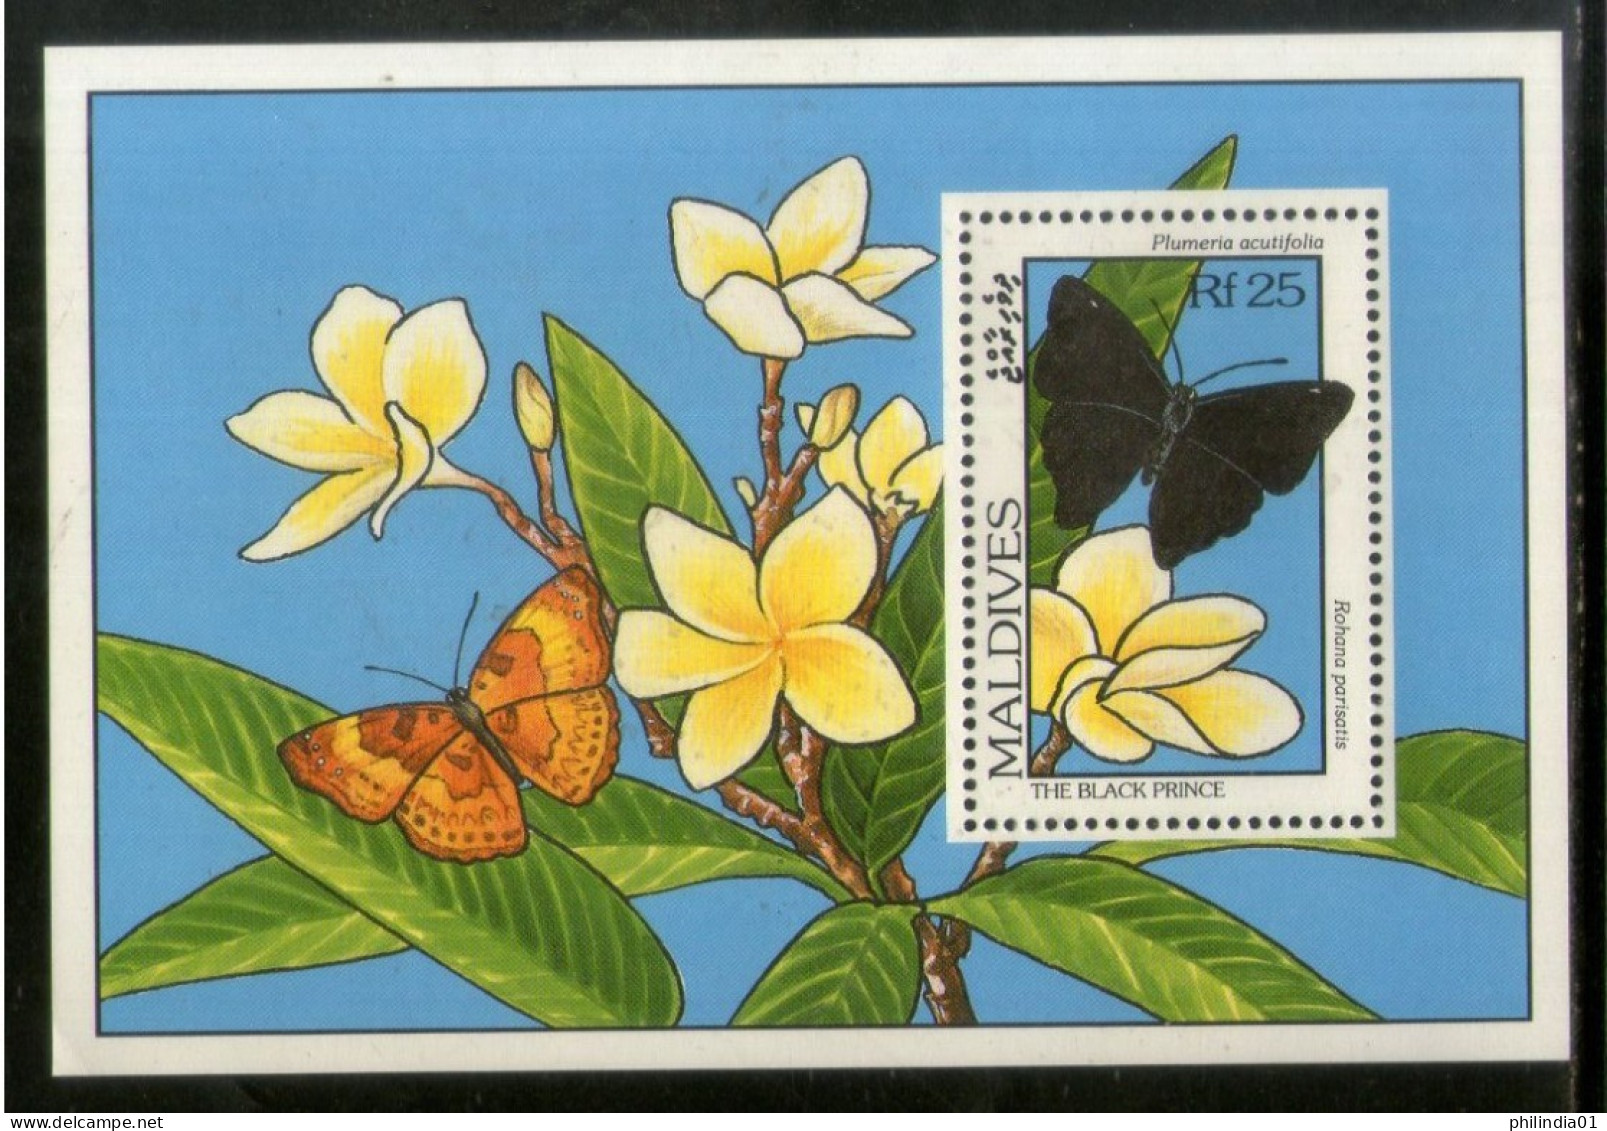 Maldives 1993 Black Prince Butterflies & Flowers Moth Insect Sc 1907 M/s MNH # 5293 - Vlinders